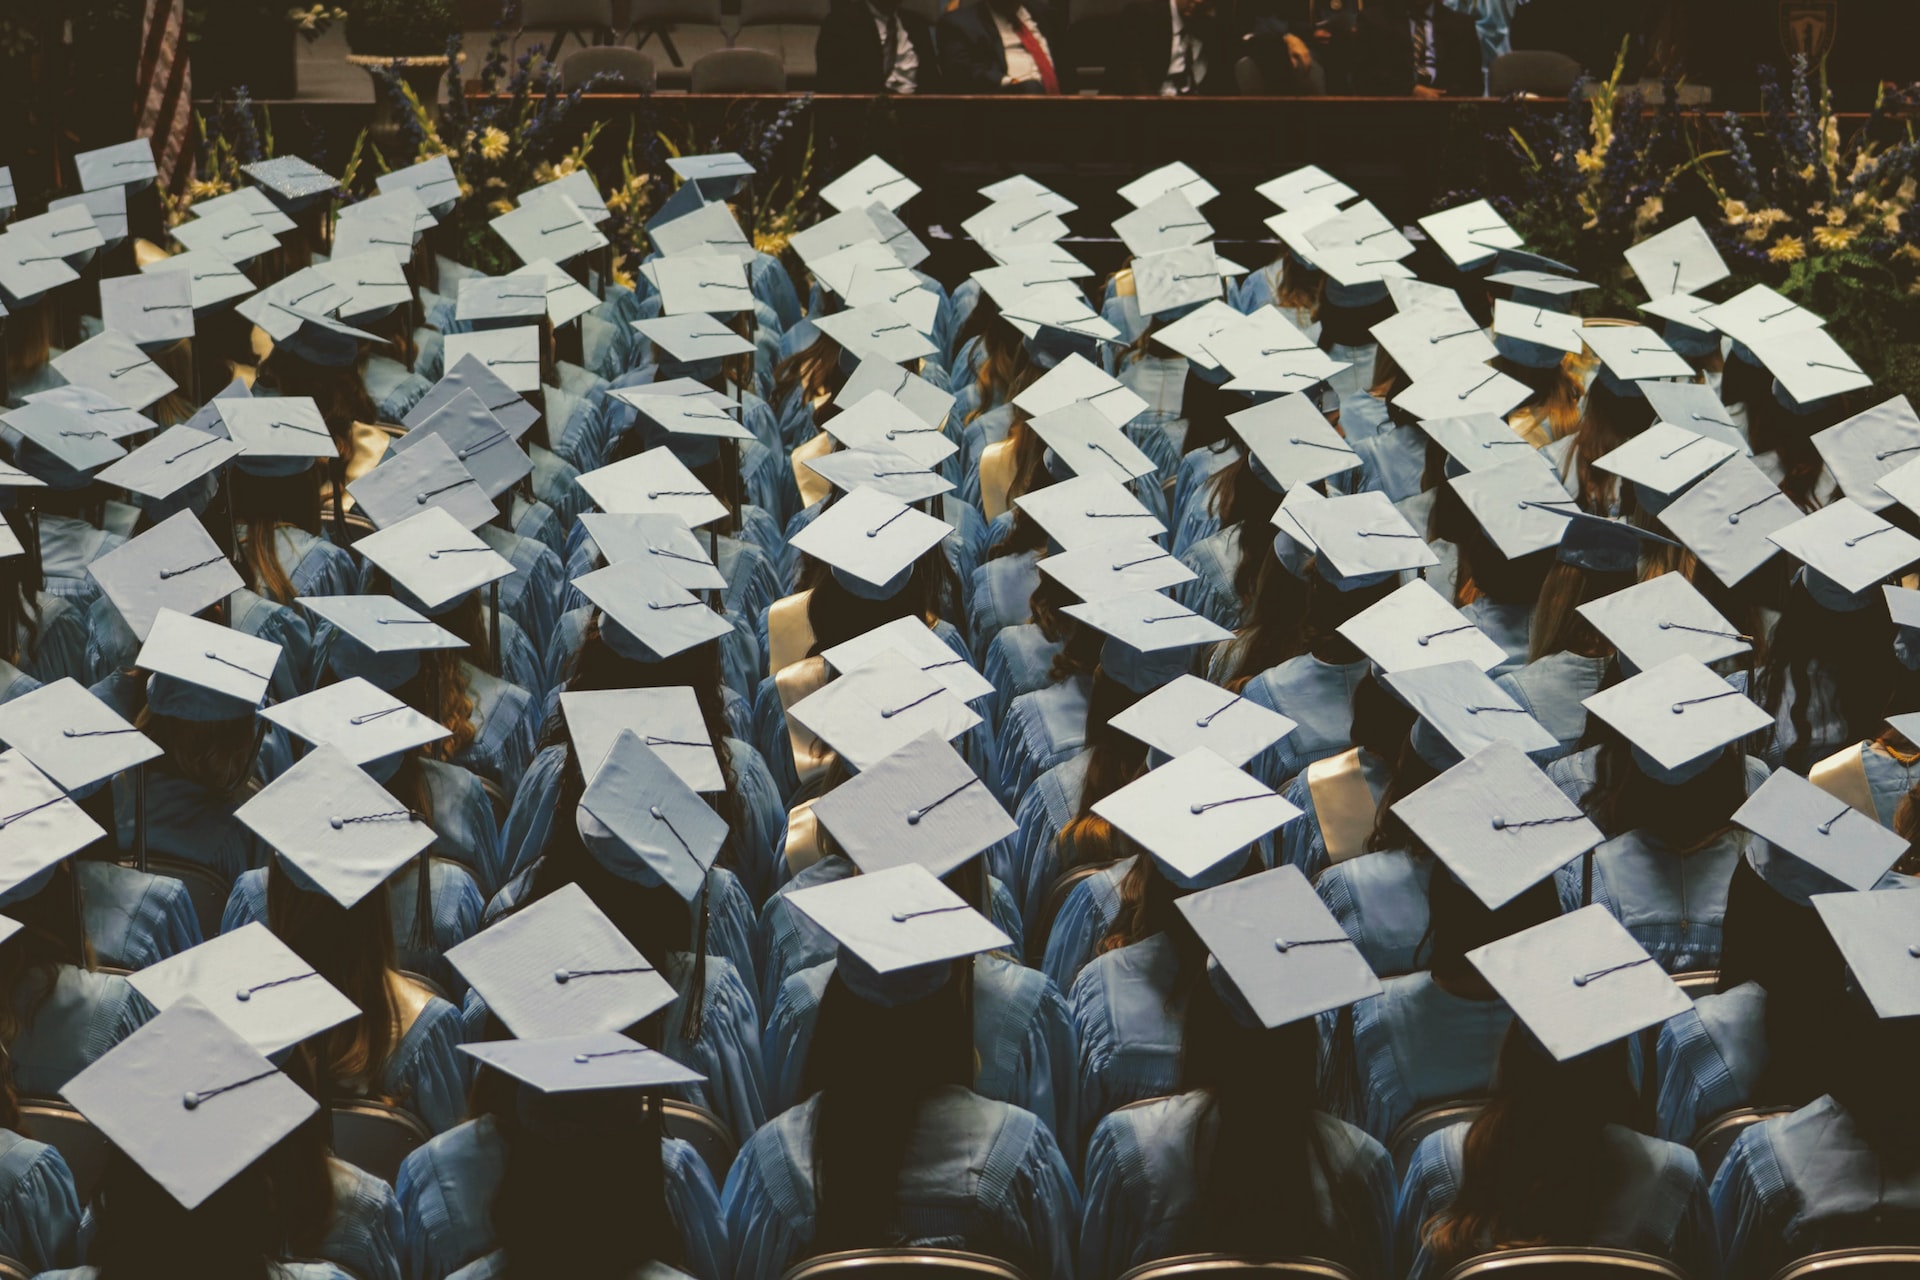 A multitude of rows of graduates in their caps and gowns sit in an auditorium, facing the stage.